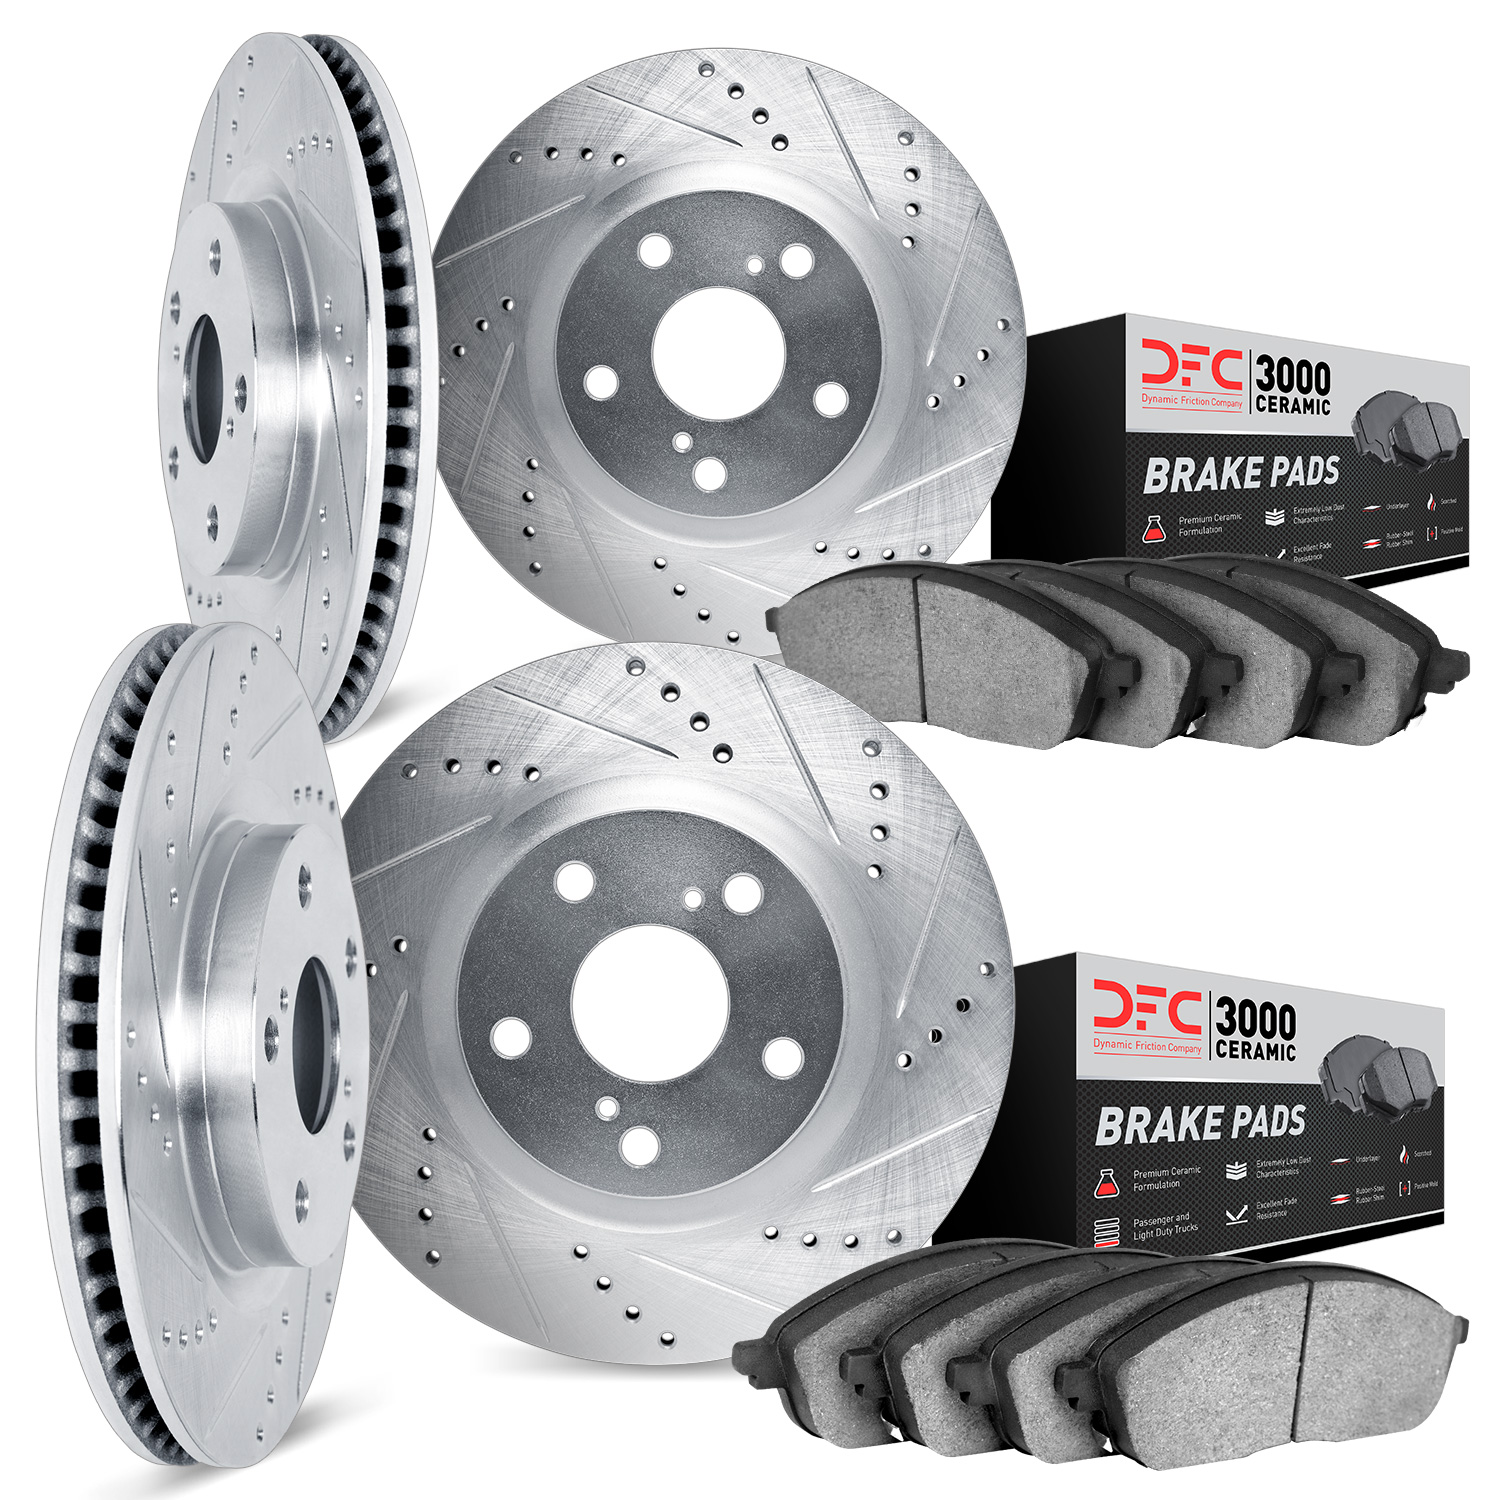 7304-74031 Drilled/Slotted Brake Rotor with 3000-Series Ceramic Brake Pads Kit [Silver], 2006-2011 Audi/Volkswagen, Position: Fr